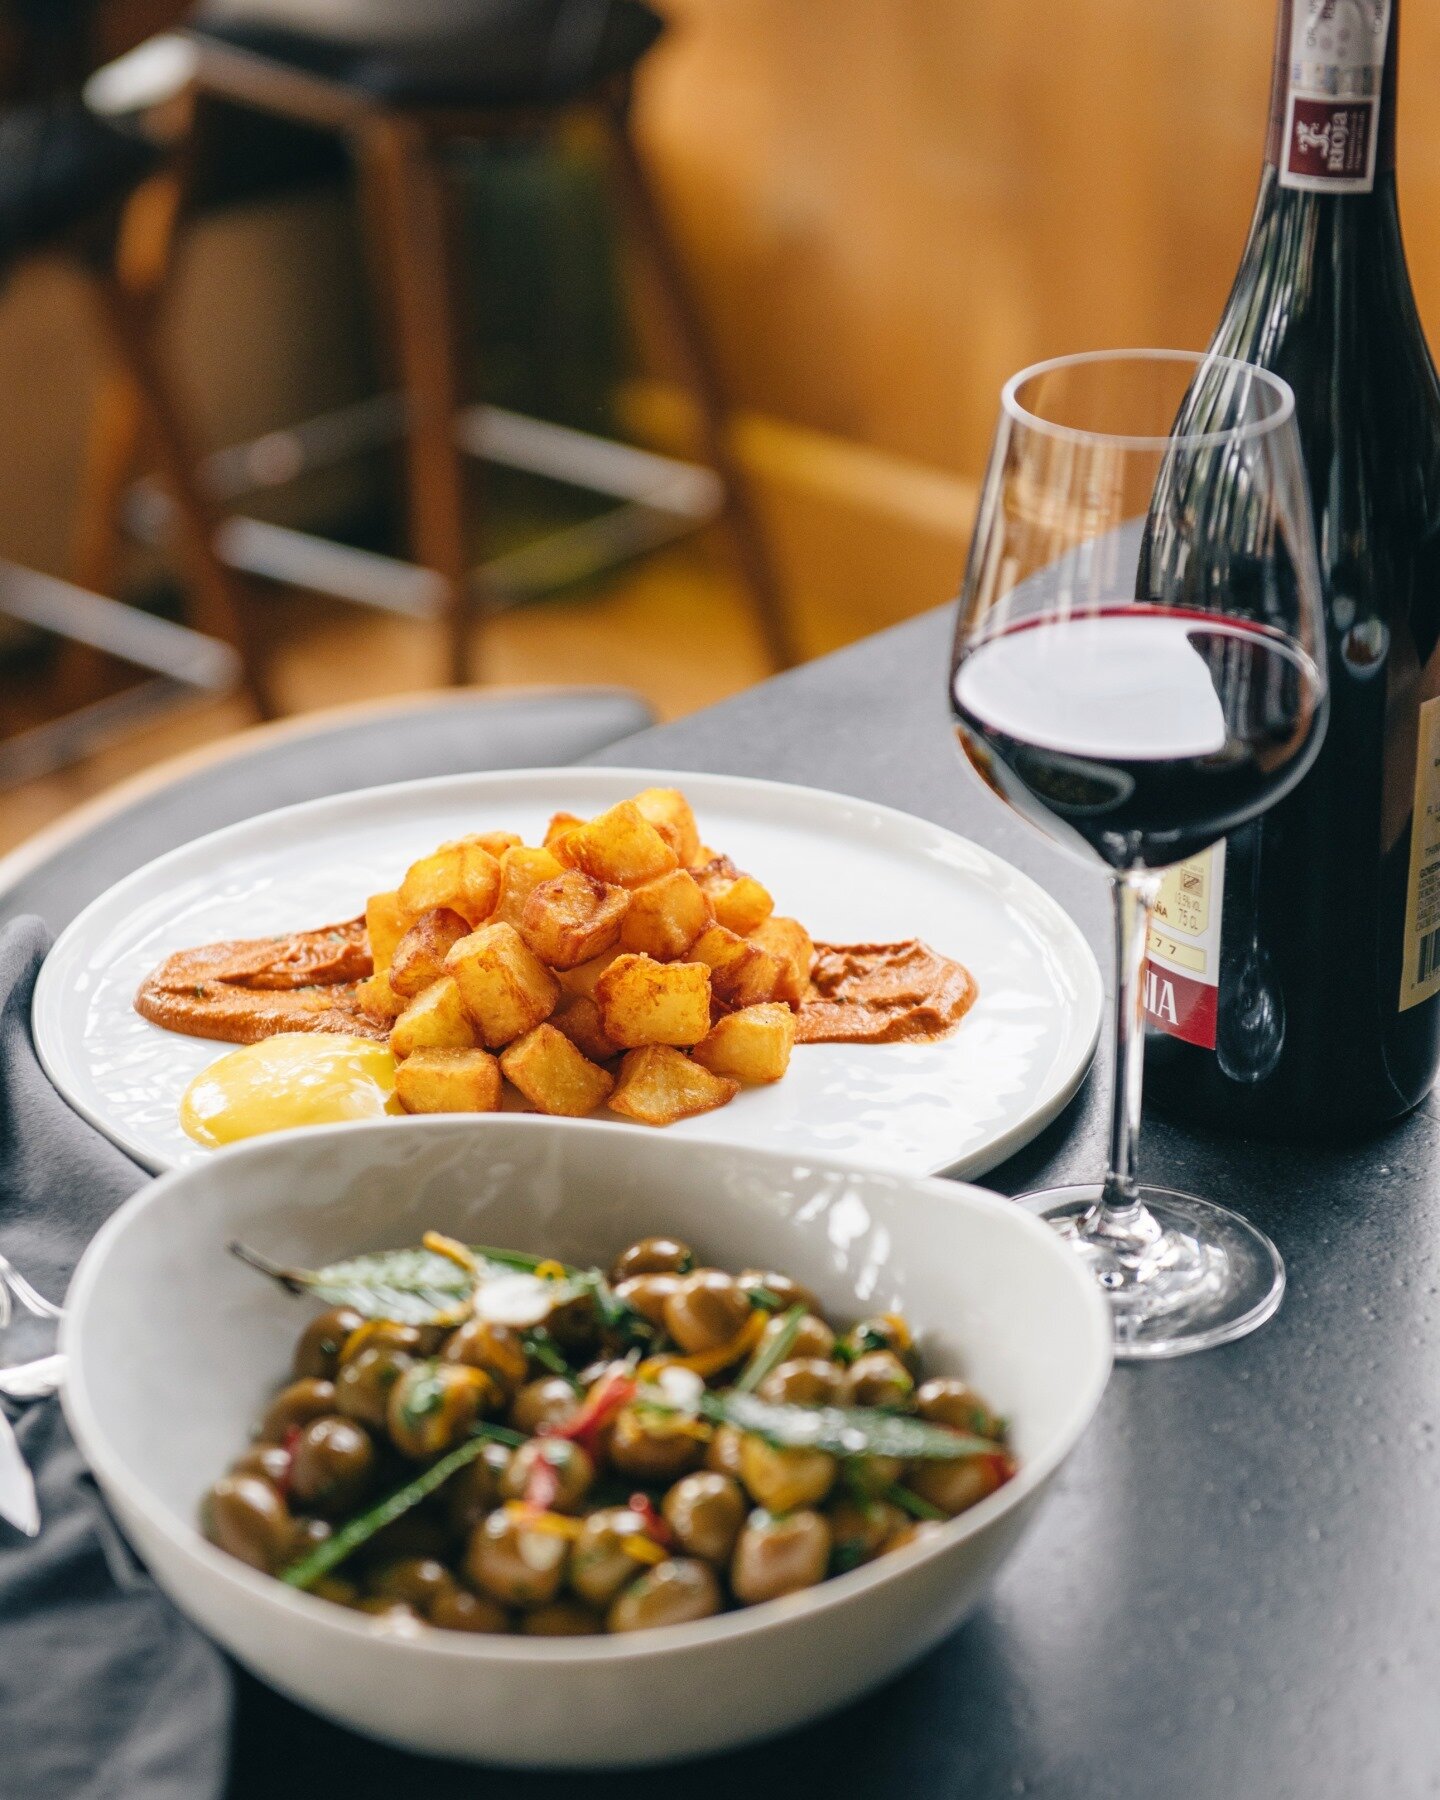 We're kicking off our first full week with two of our house favorites: Olivos Laurel &amp; our Patatas Bravas. 

We're open Tuesday-Friday from 4pm-10pm &amp; Saturday from 12pm-10pm. View our fully menu via the link in our bio! #laurelonrutledge